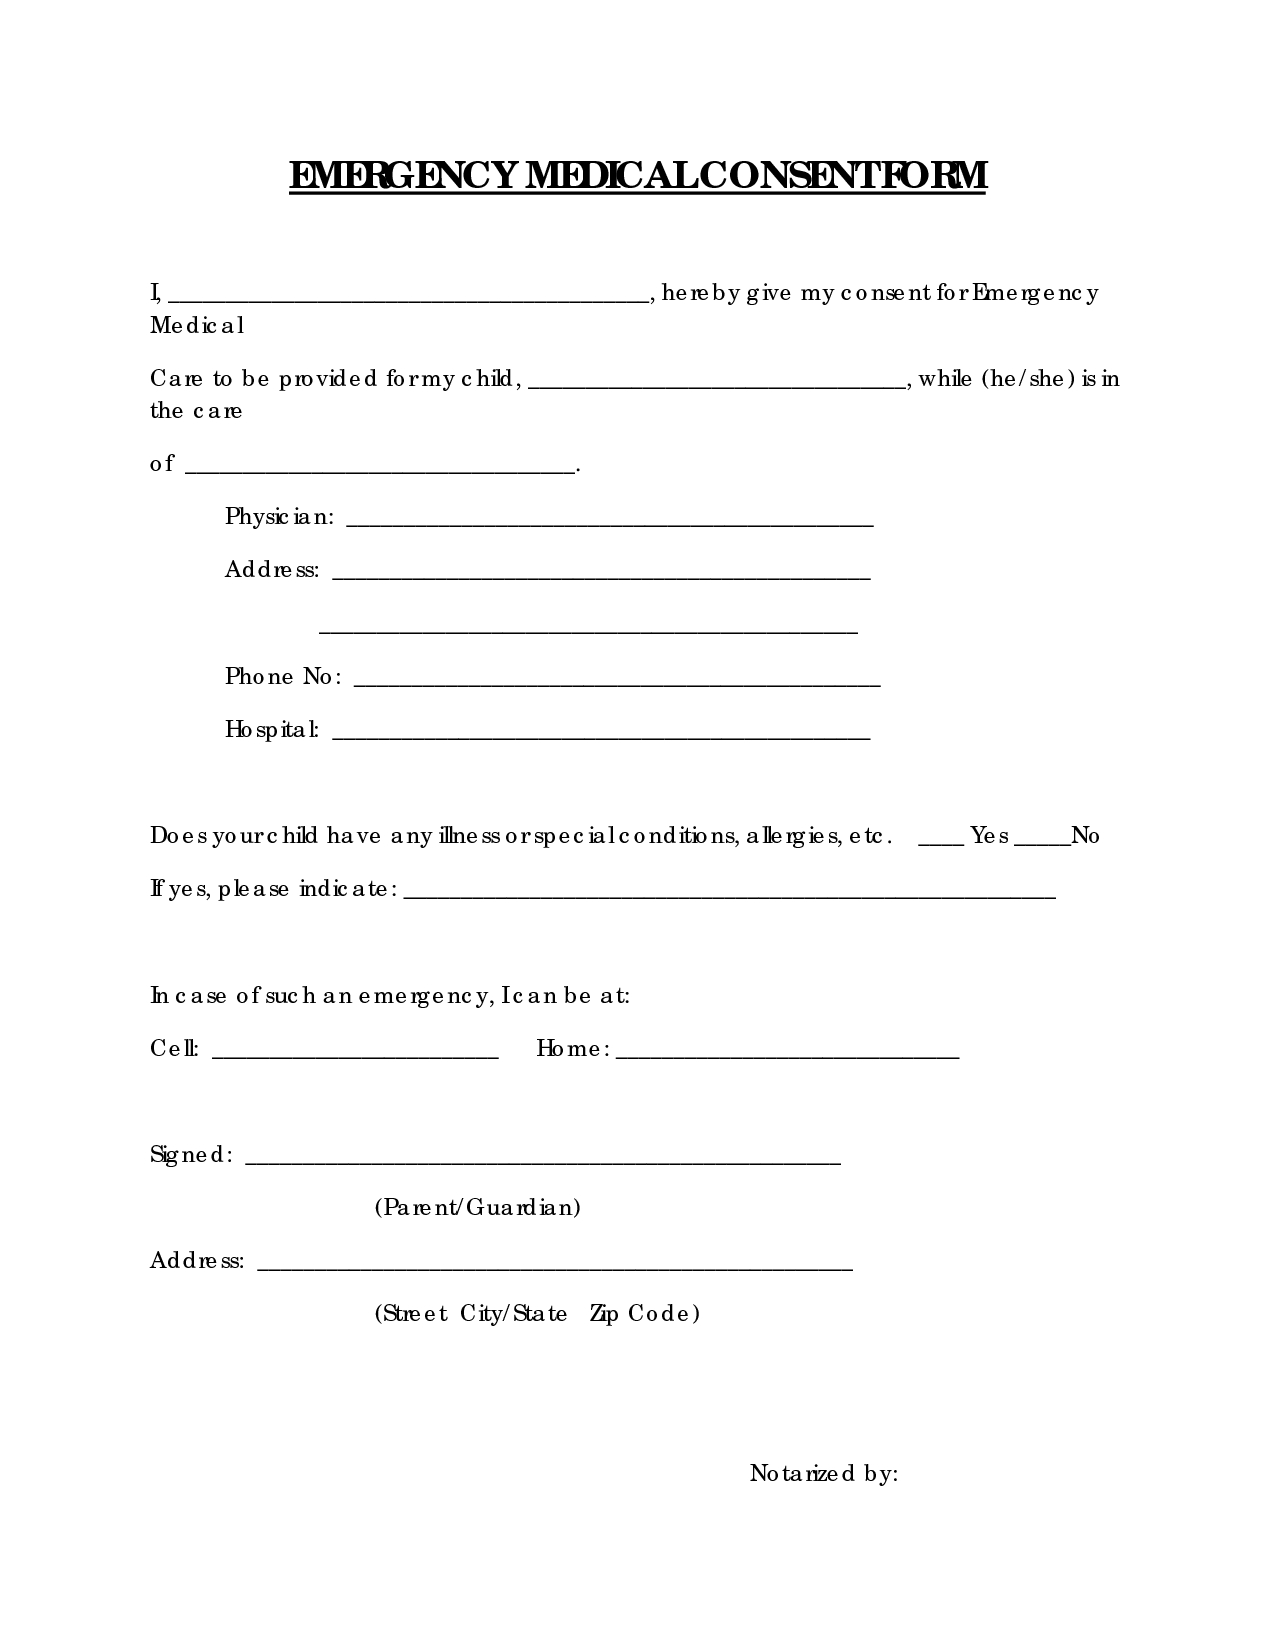 Free Printable Medical Consent Form | Emergency Medical Consent Form - Free Printable Child Medical Consent Form